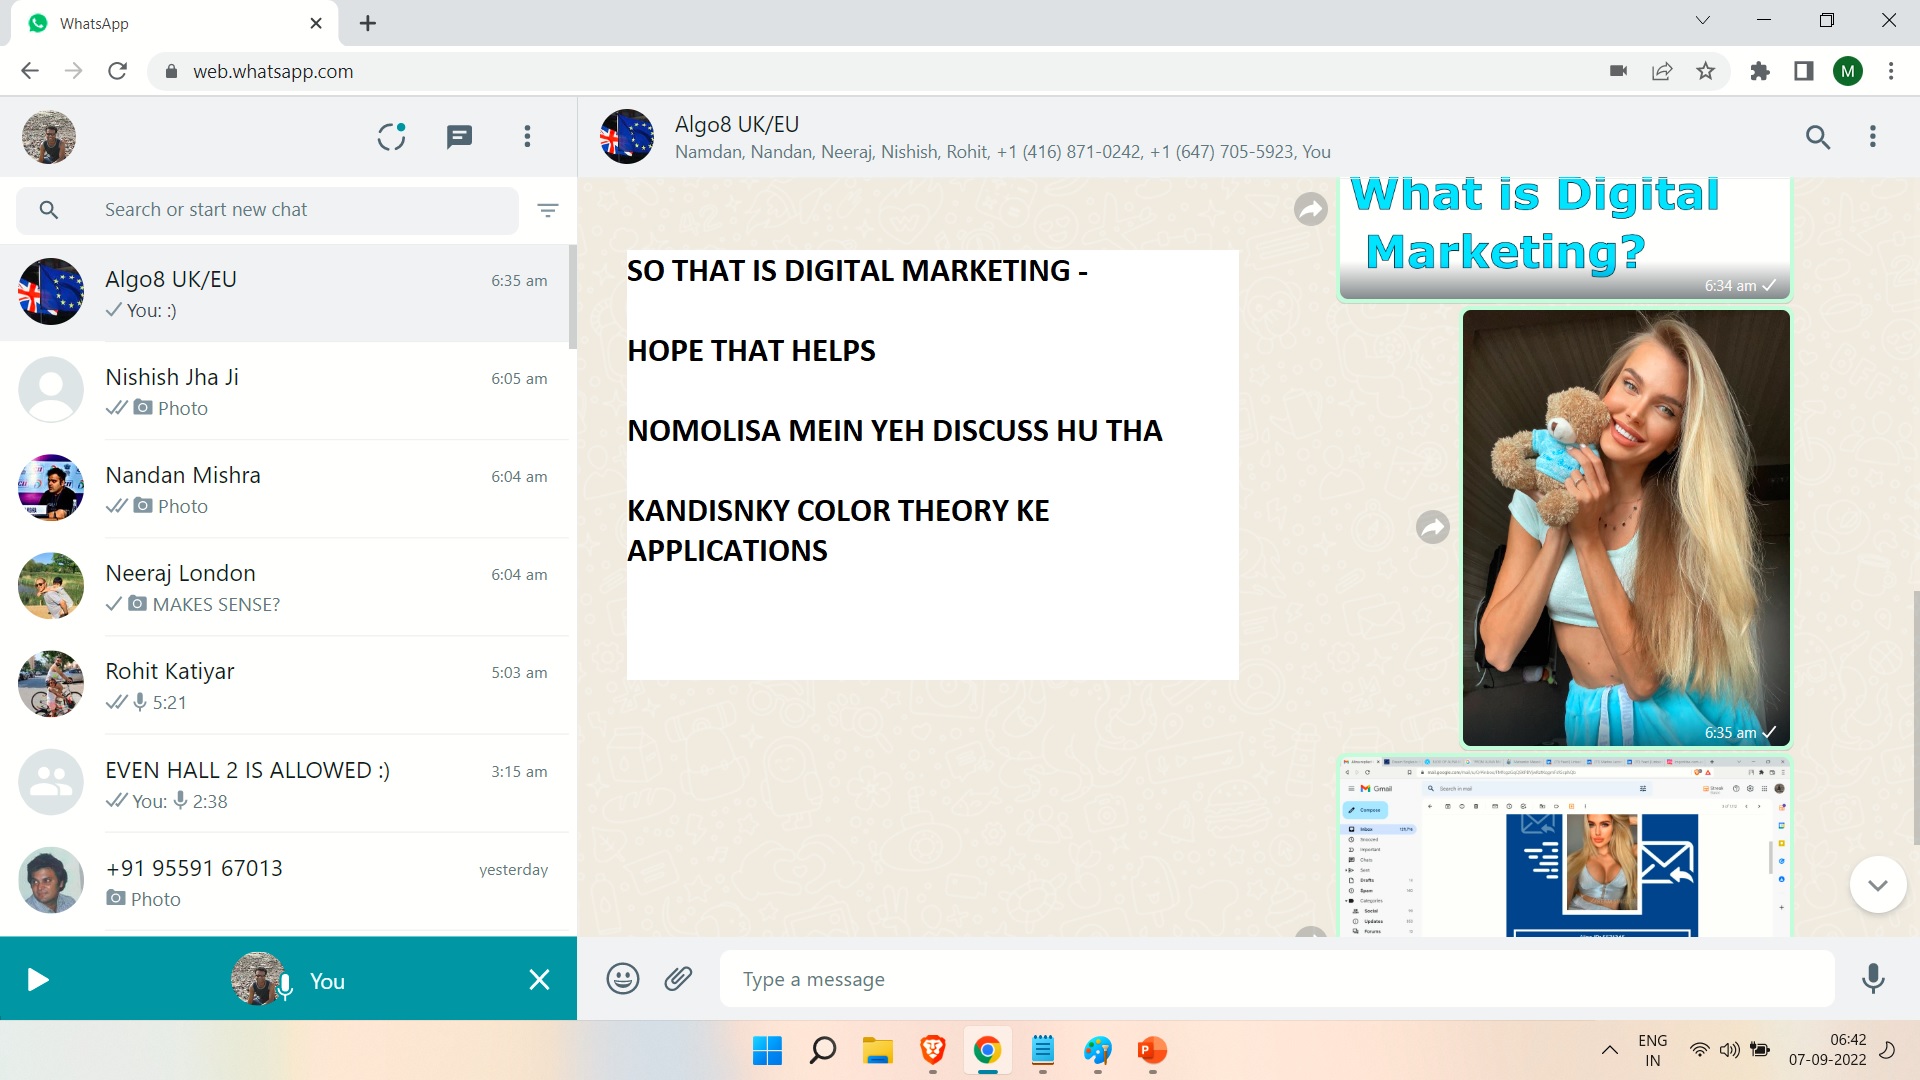 KANDISNKY COLOR THEORY AND DIGITAL MARKETING